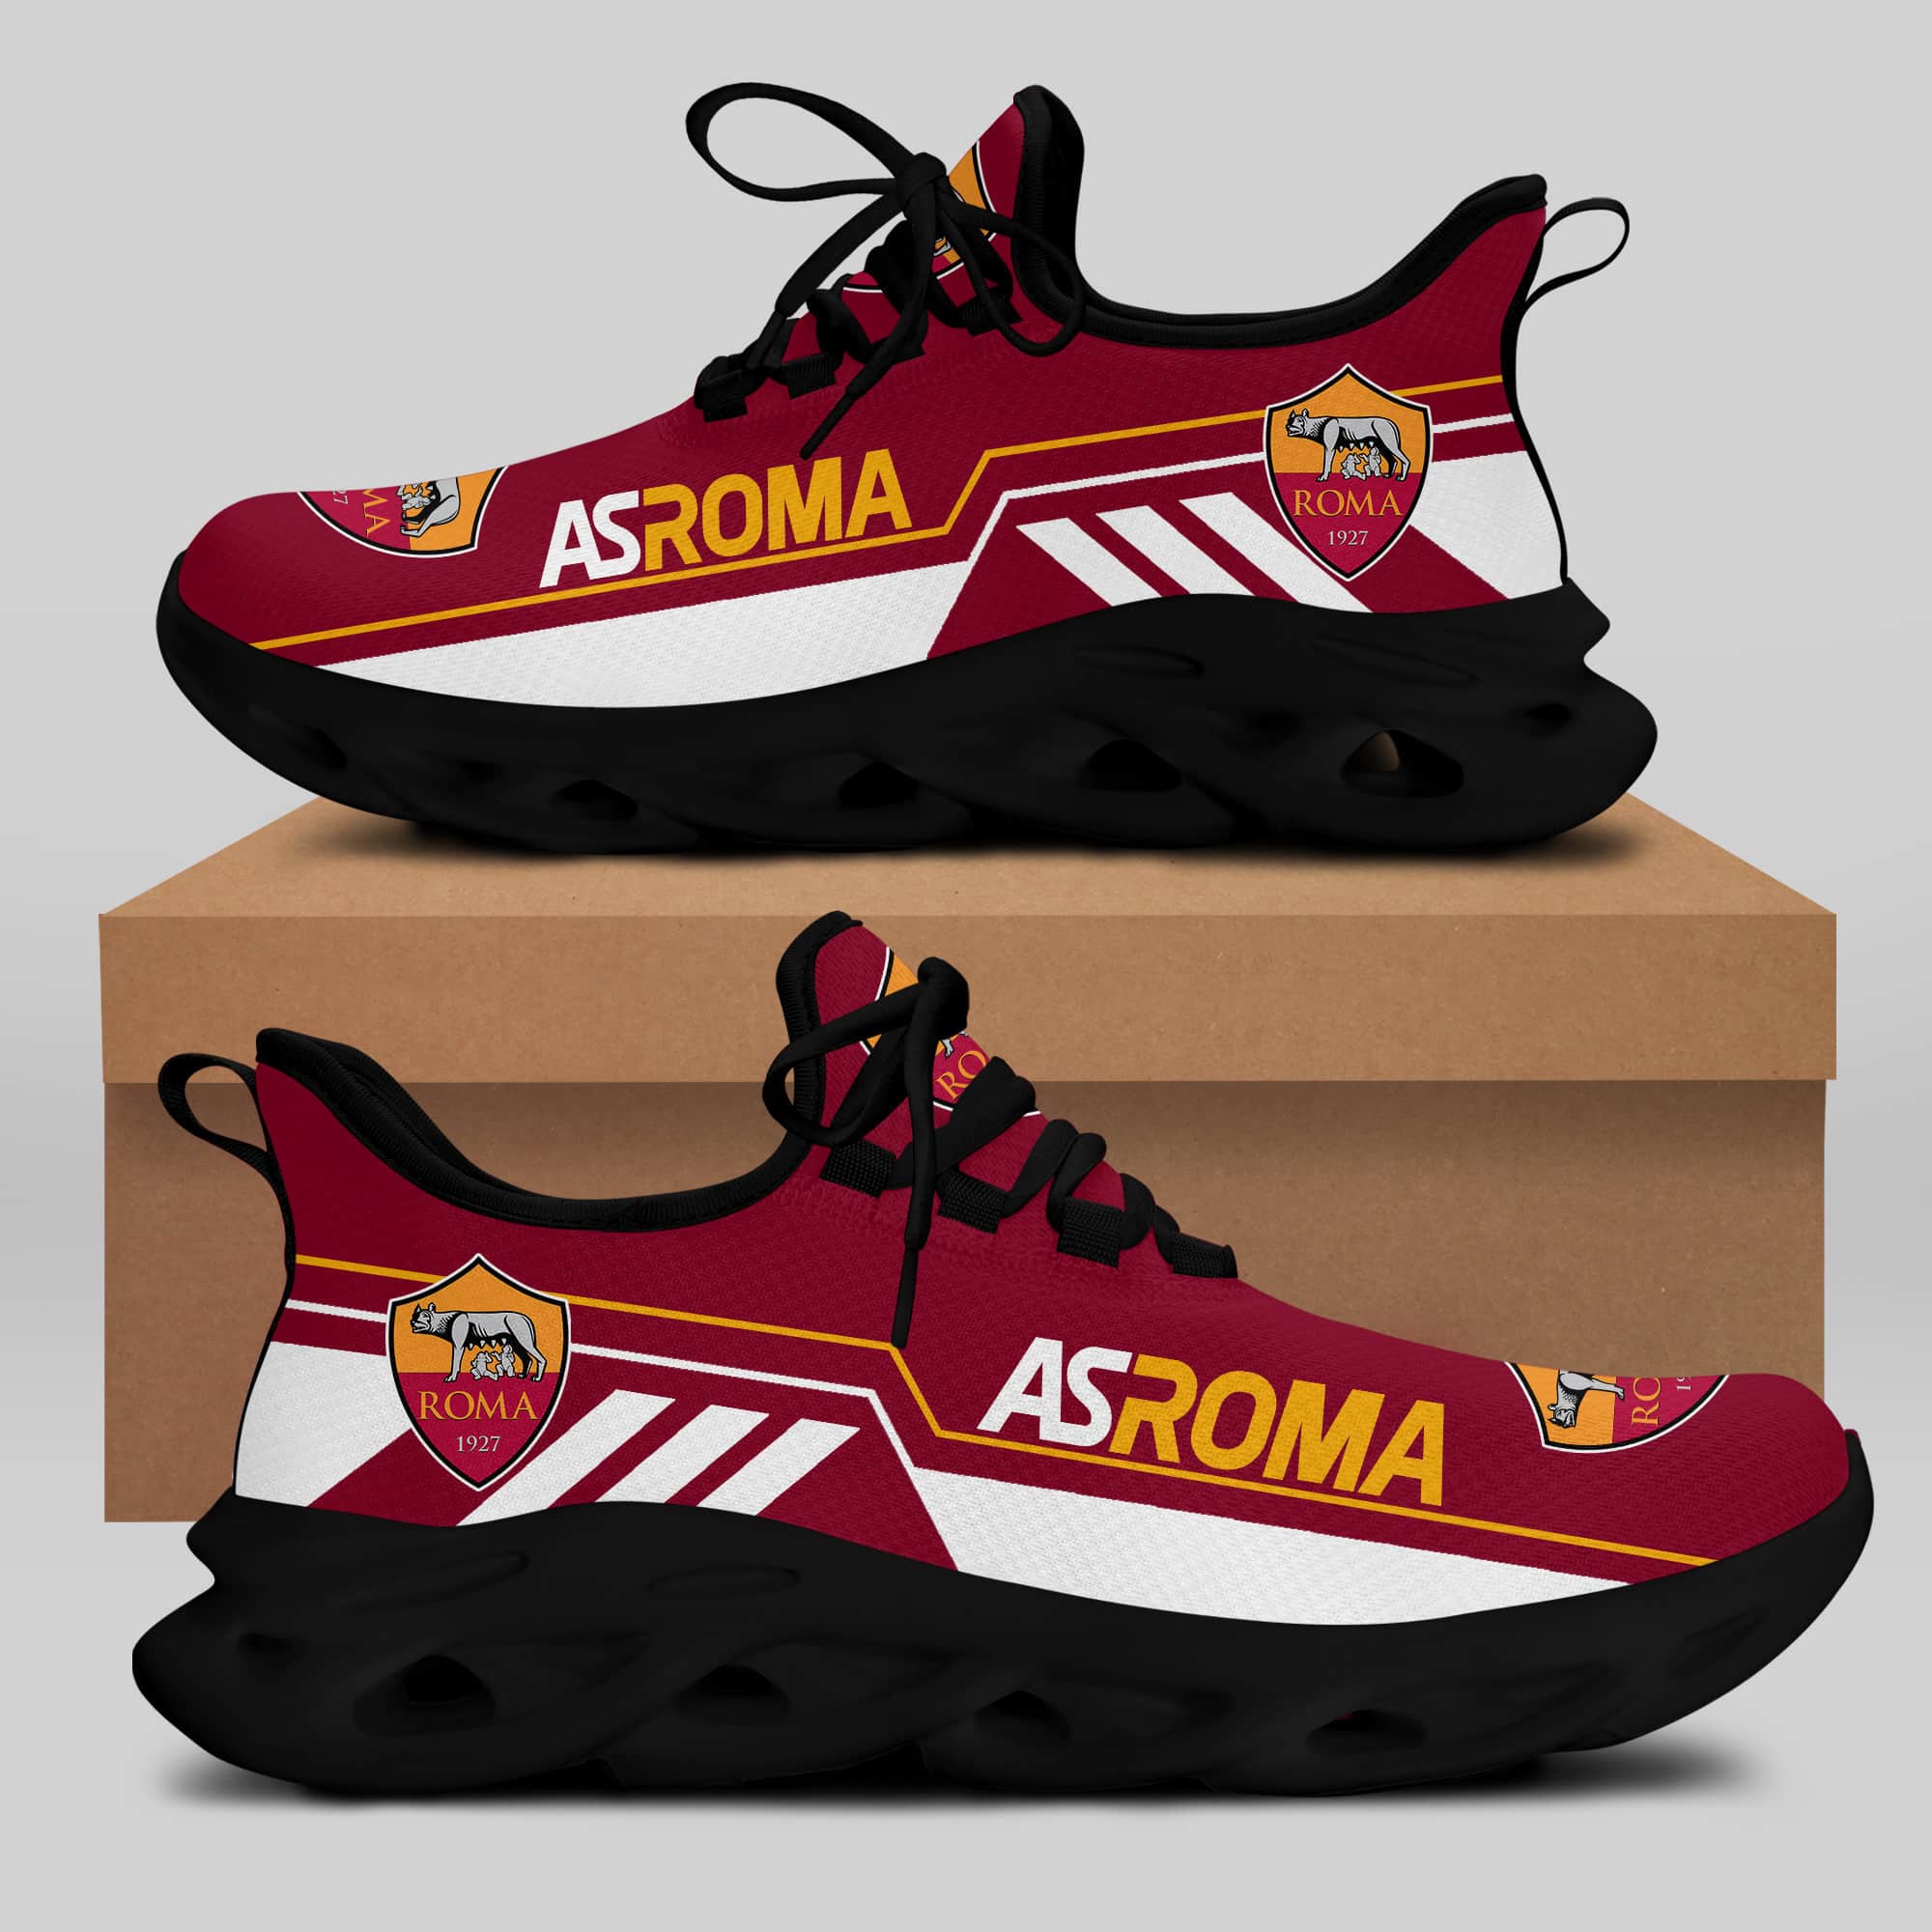 As Roma Running Shoes Max Soul Shoes Sneakers Ver 11 2